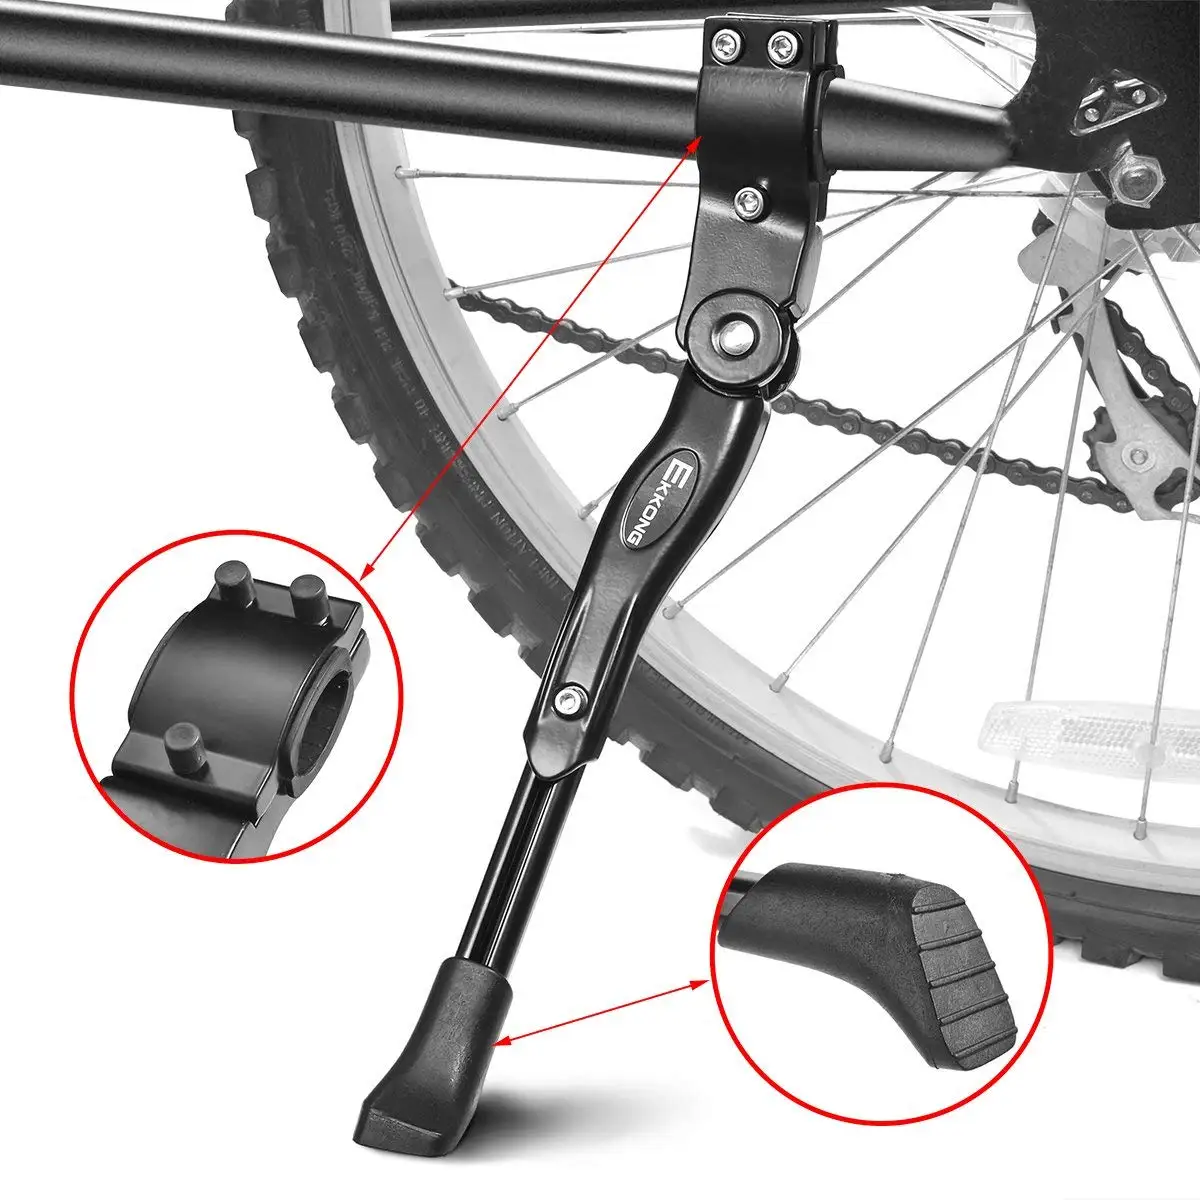 TAIKA Aluminum Alloy Adjustable Bicycle Kickstand Mountain Bike Fits 24-28 Inches Bicycles